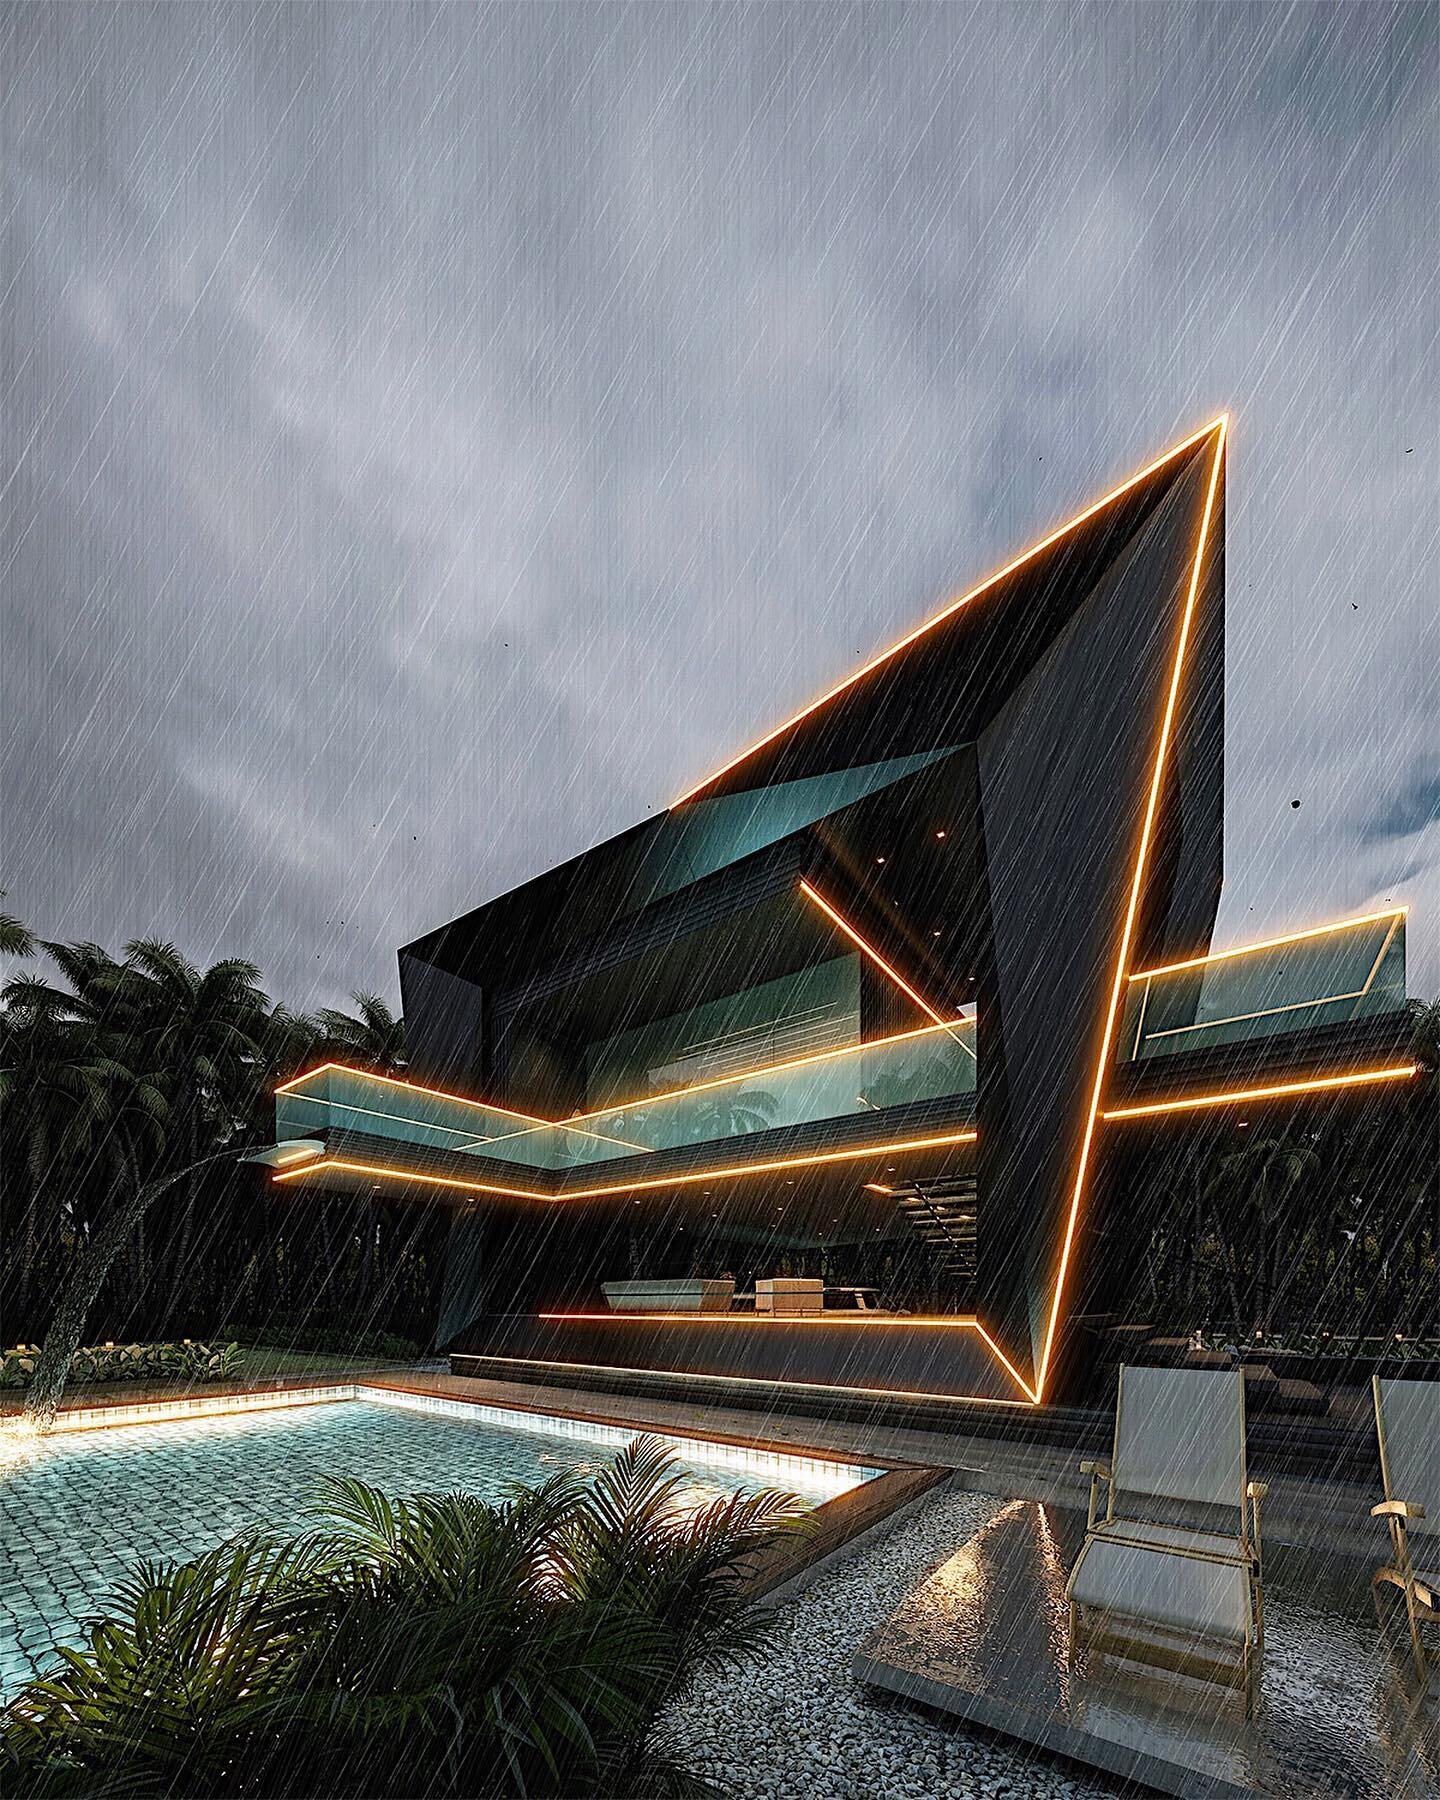 Step into a fusion of futuristic design and nature's beauty. Amin Moazzen's visionary creation blends striking angles with cascading light, forming an enchanting dance. The merging waterfall and lush pool make every corner a sensory delight.

Kindly 